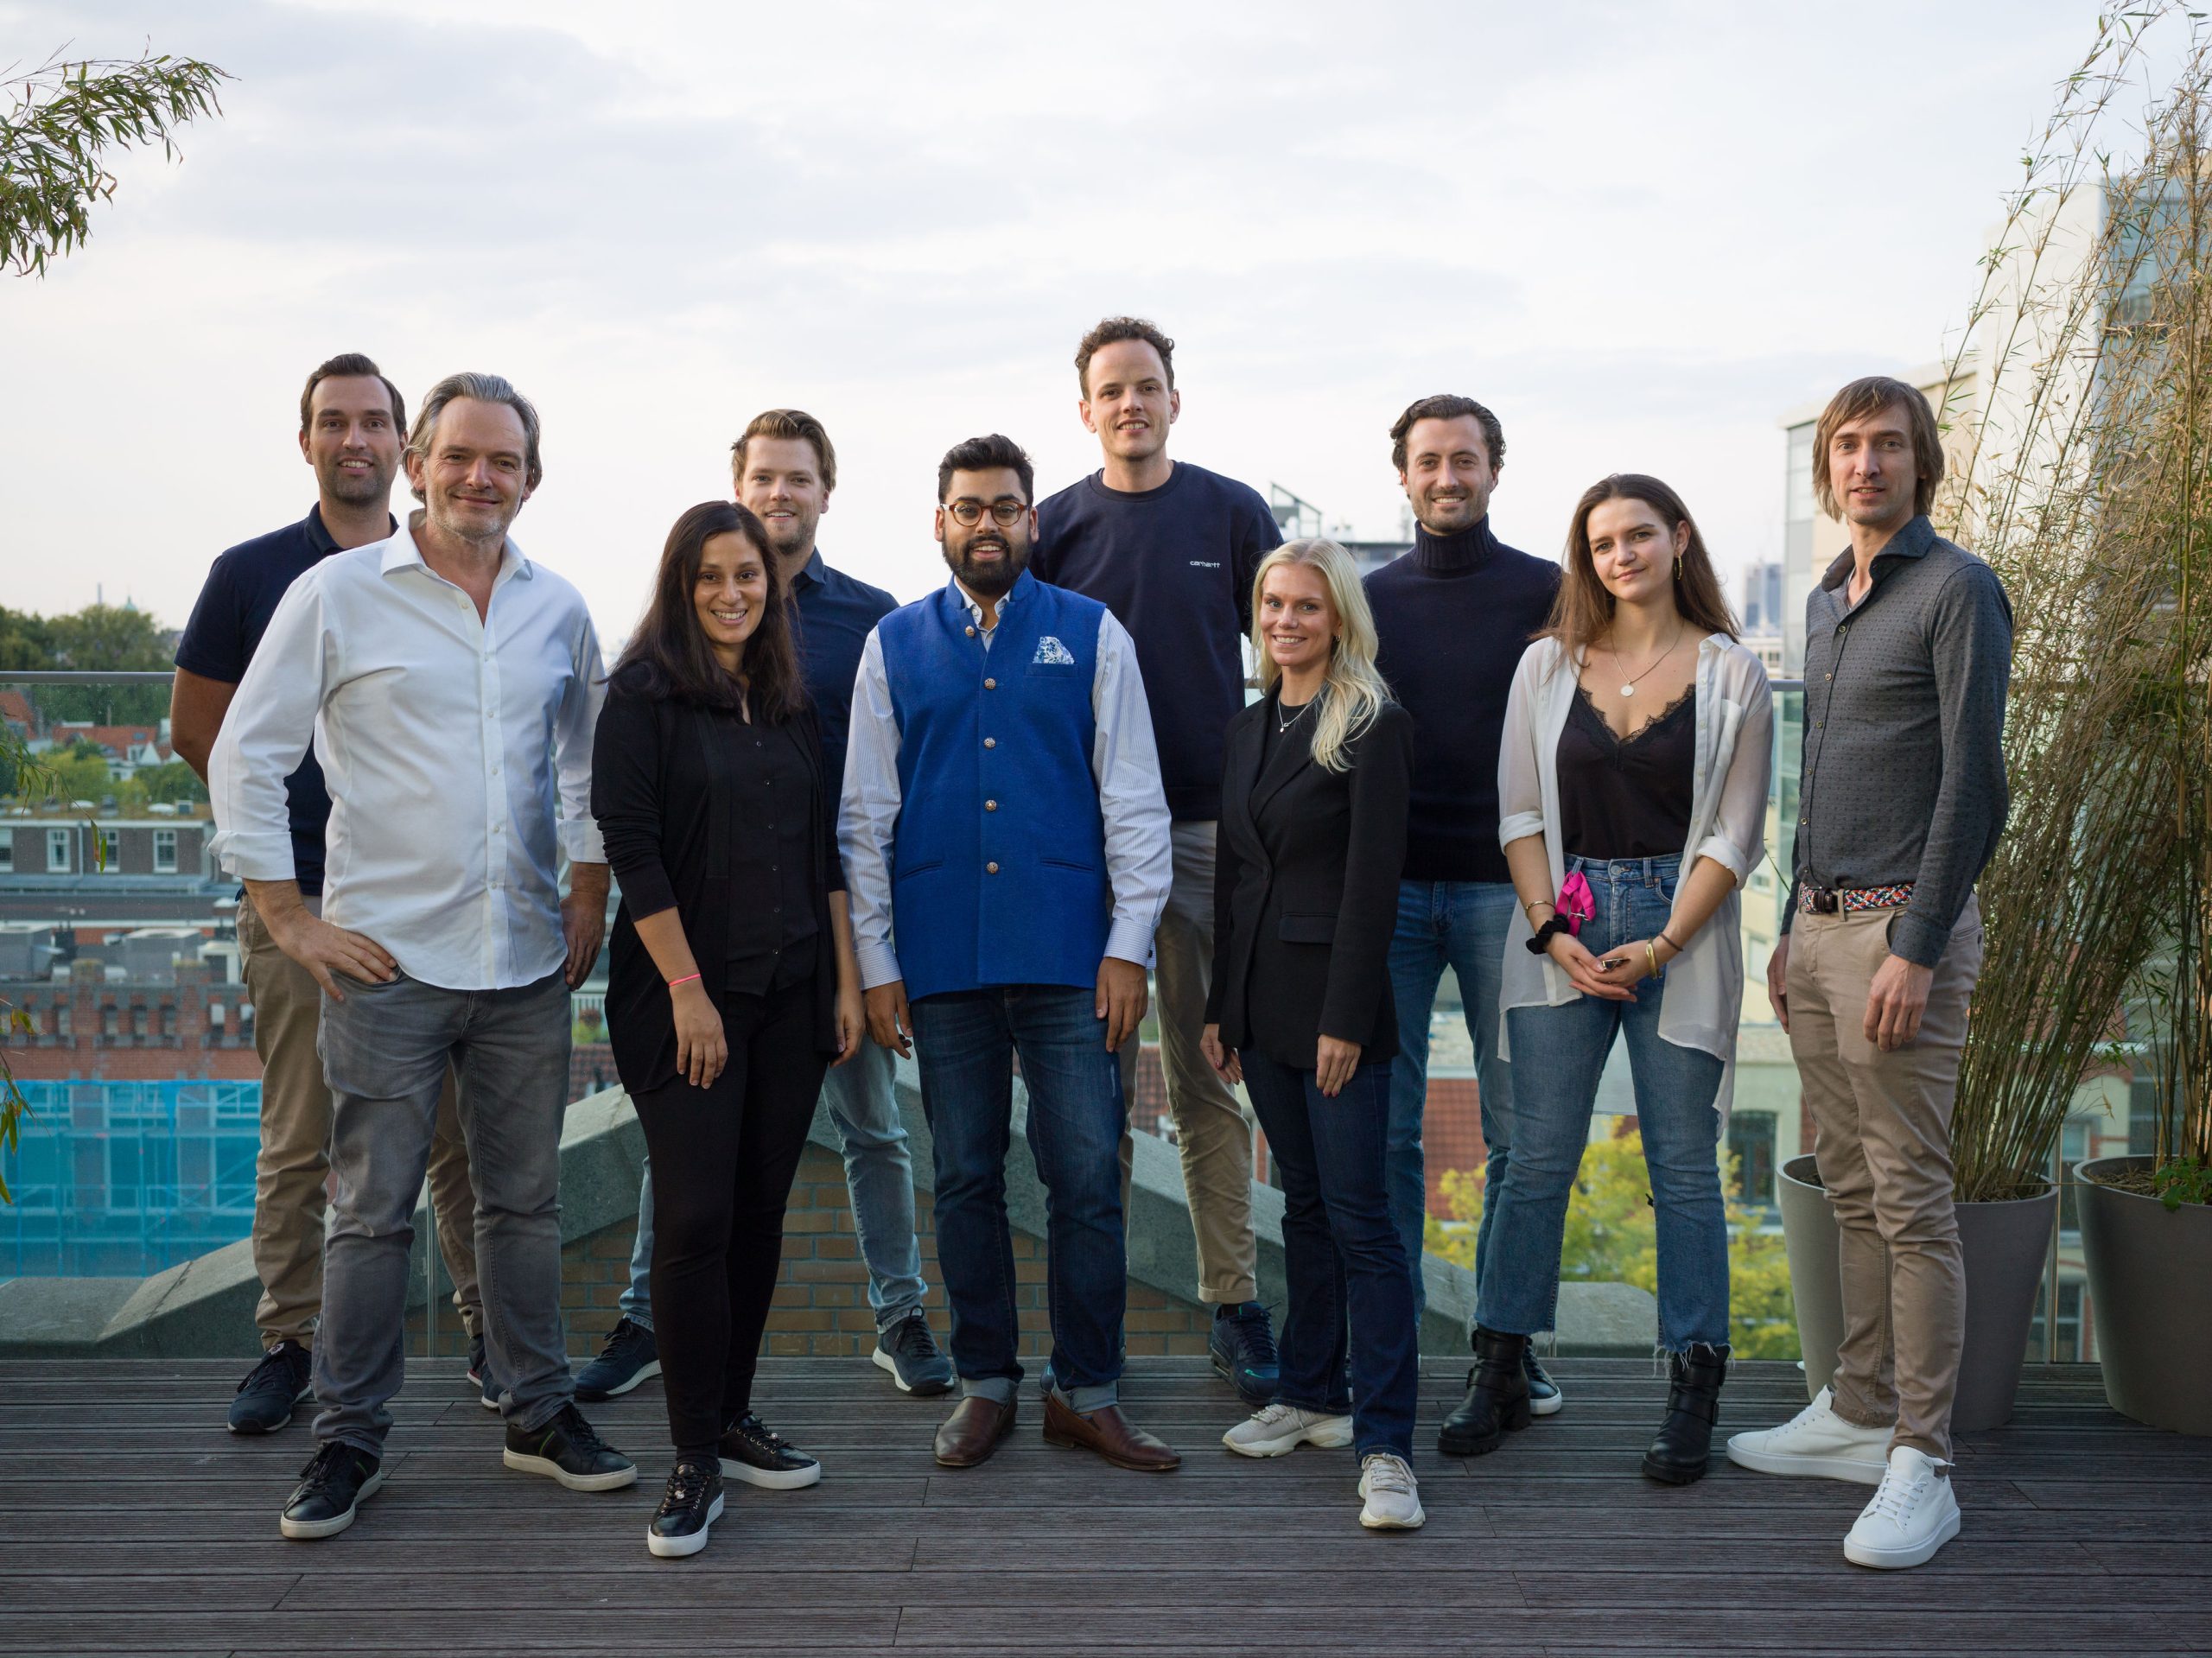 Backed by founders, Peak launches new EUR 150M European seed fund